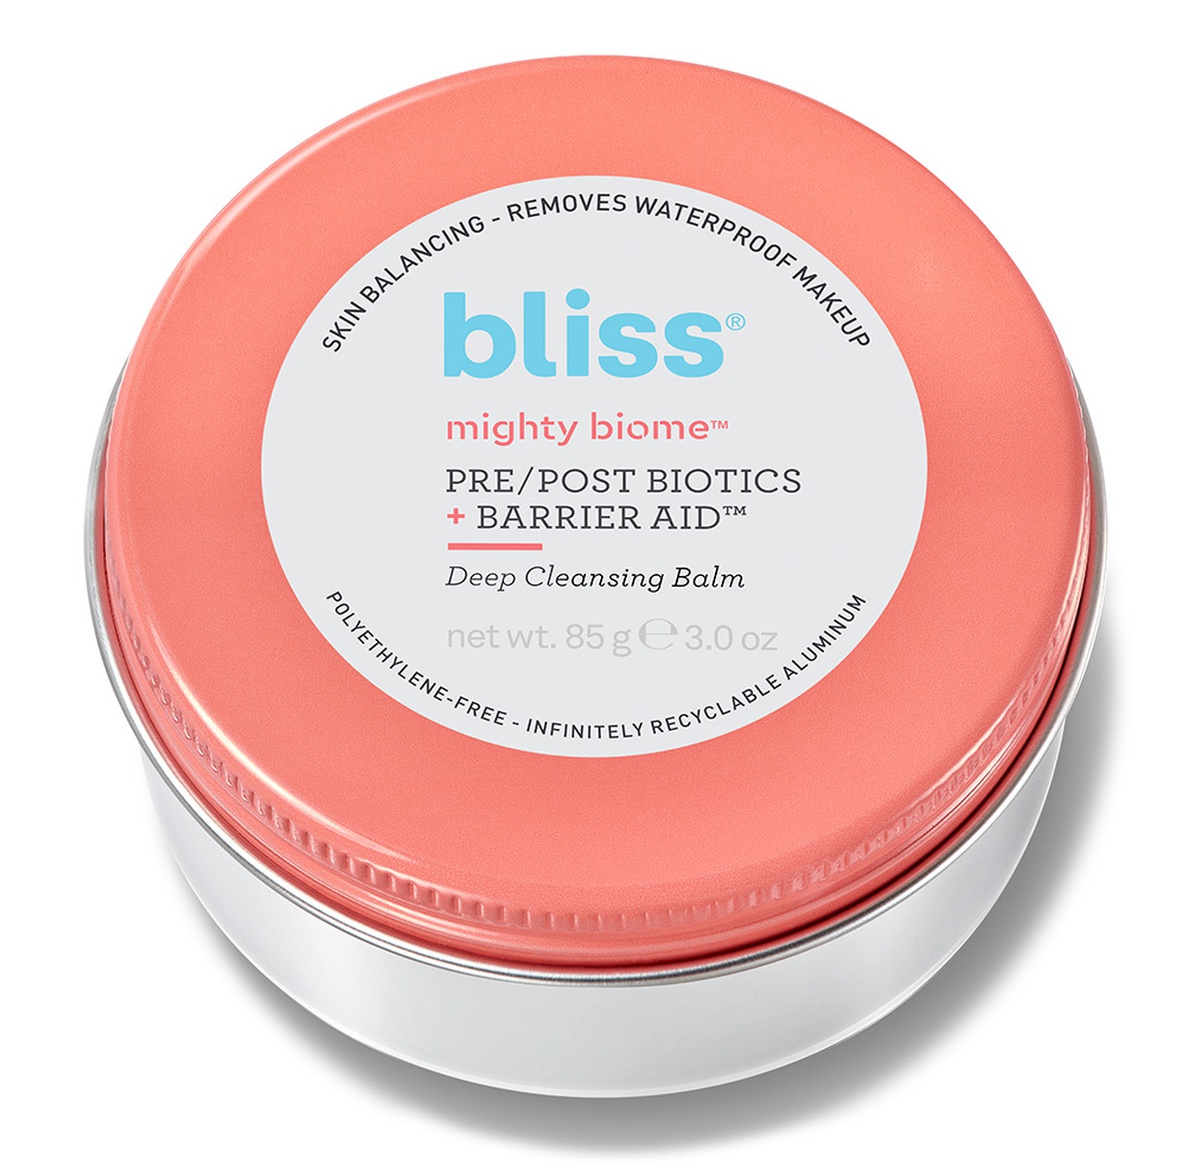 Bliss Mighty Biome Pre/post Biotics + Barrier Aid™ Cleansing Balm